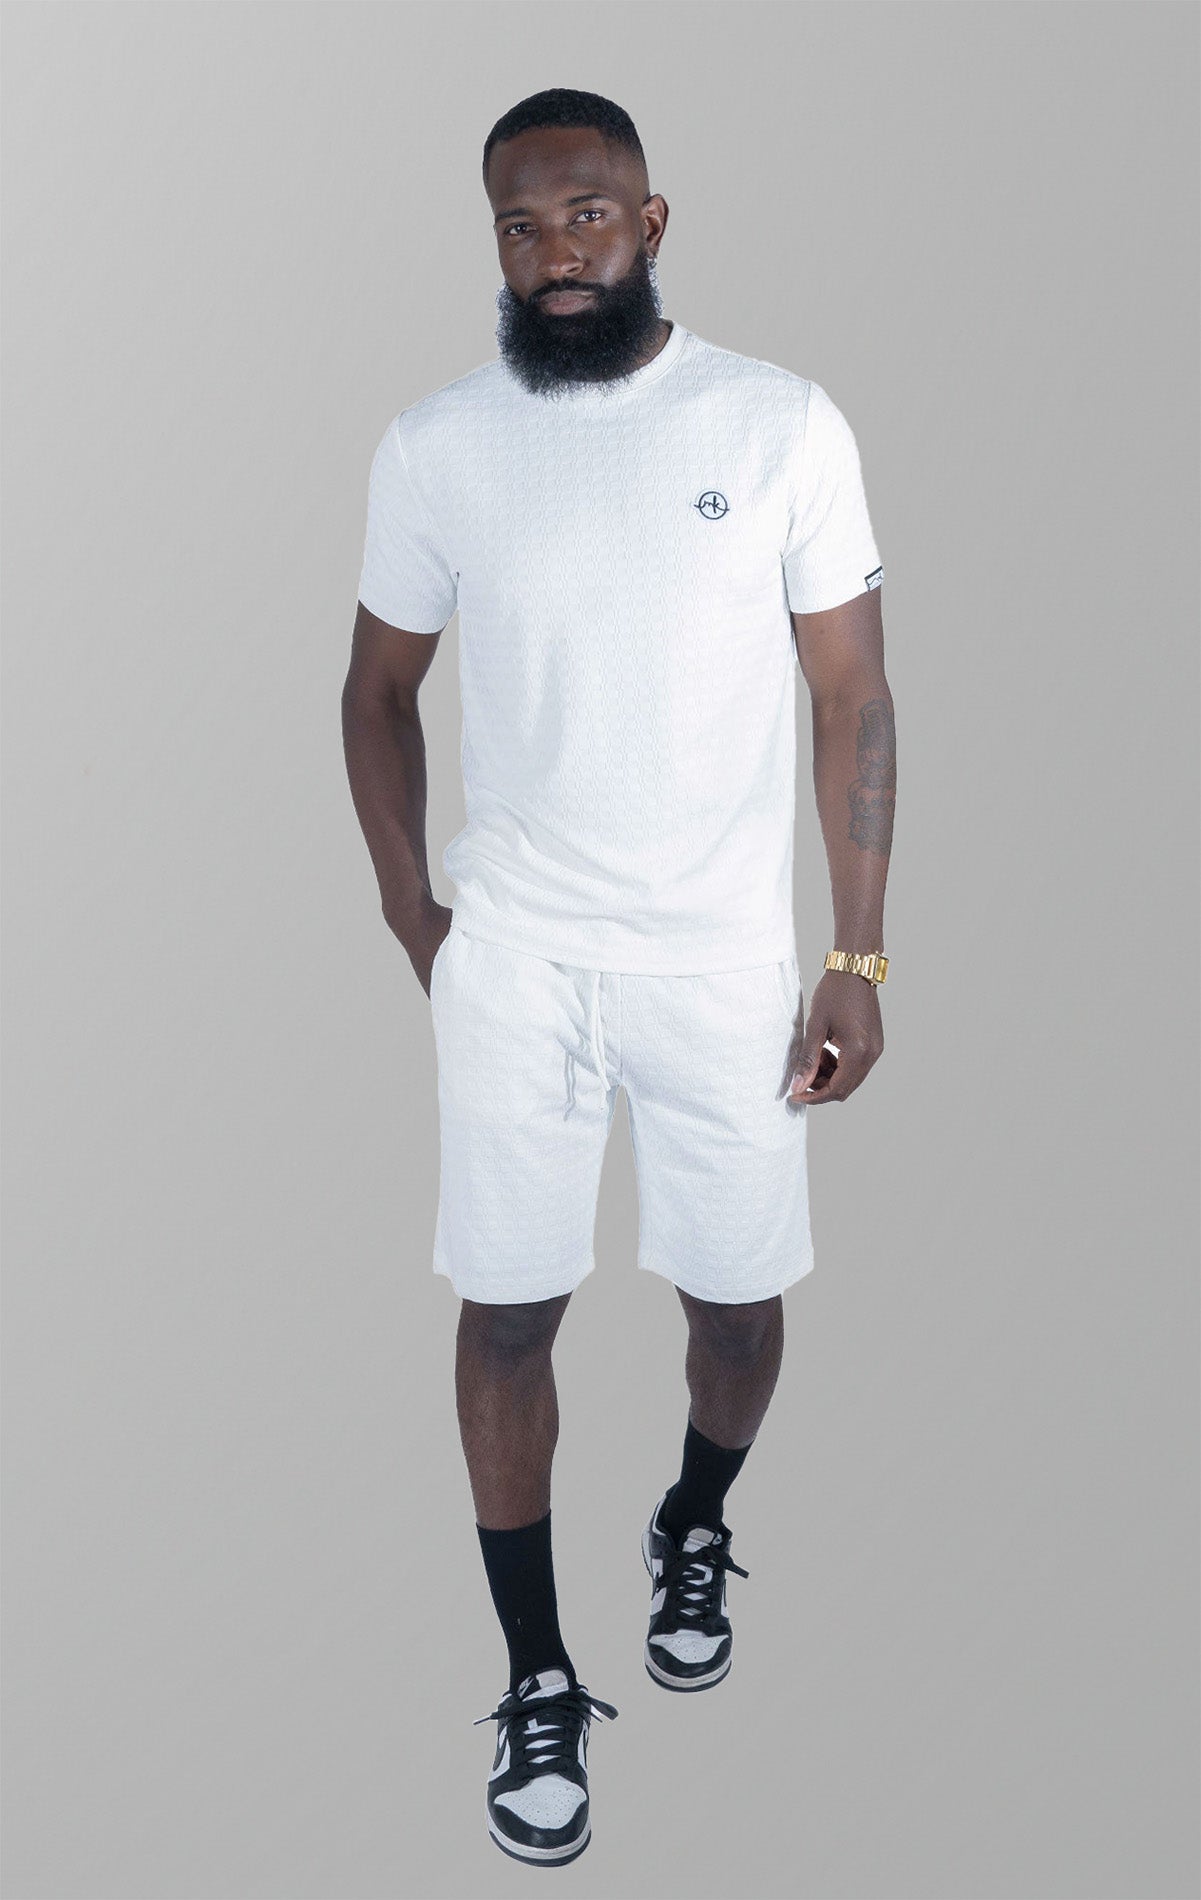 White Modena Knit Tee. Made from a high-quality blend of 95% cotton and 5% spandex for a soft and comfortable feel. Features a unique embossed jacquard fabric with colored blocking for a textured and stylish look. This tee is pre-shrunk and true to size.